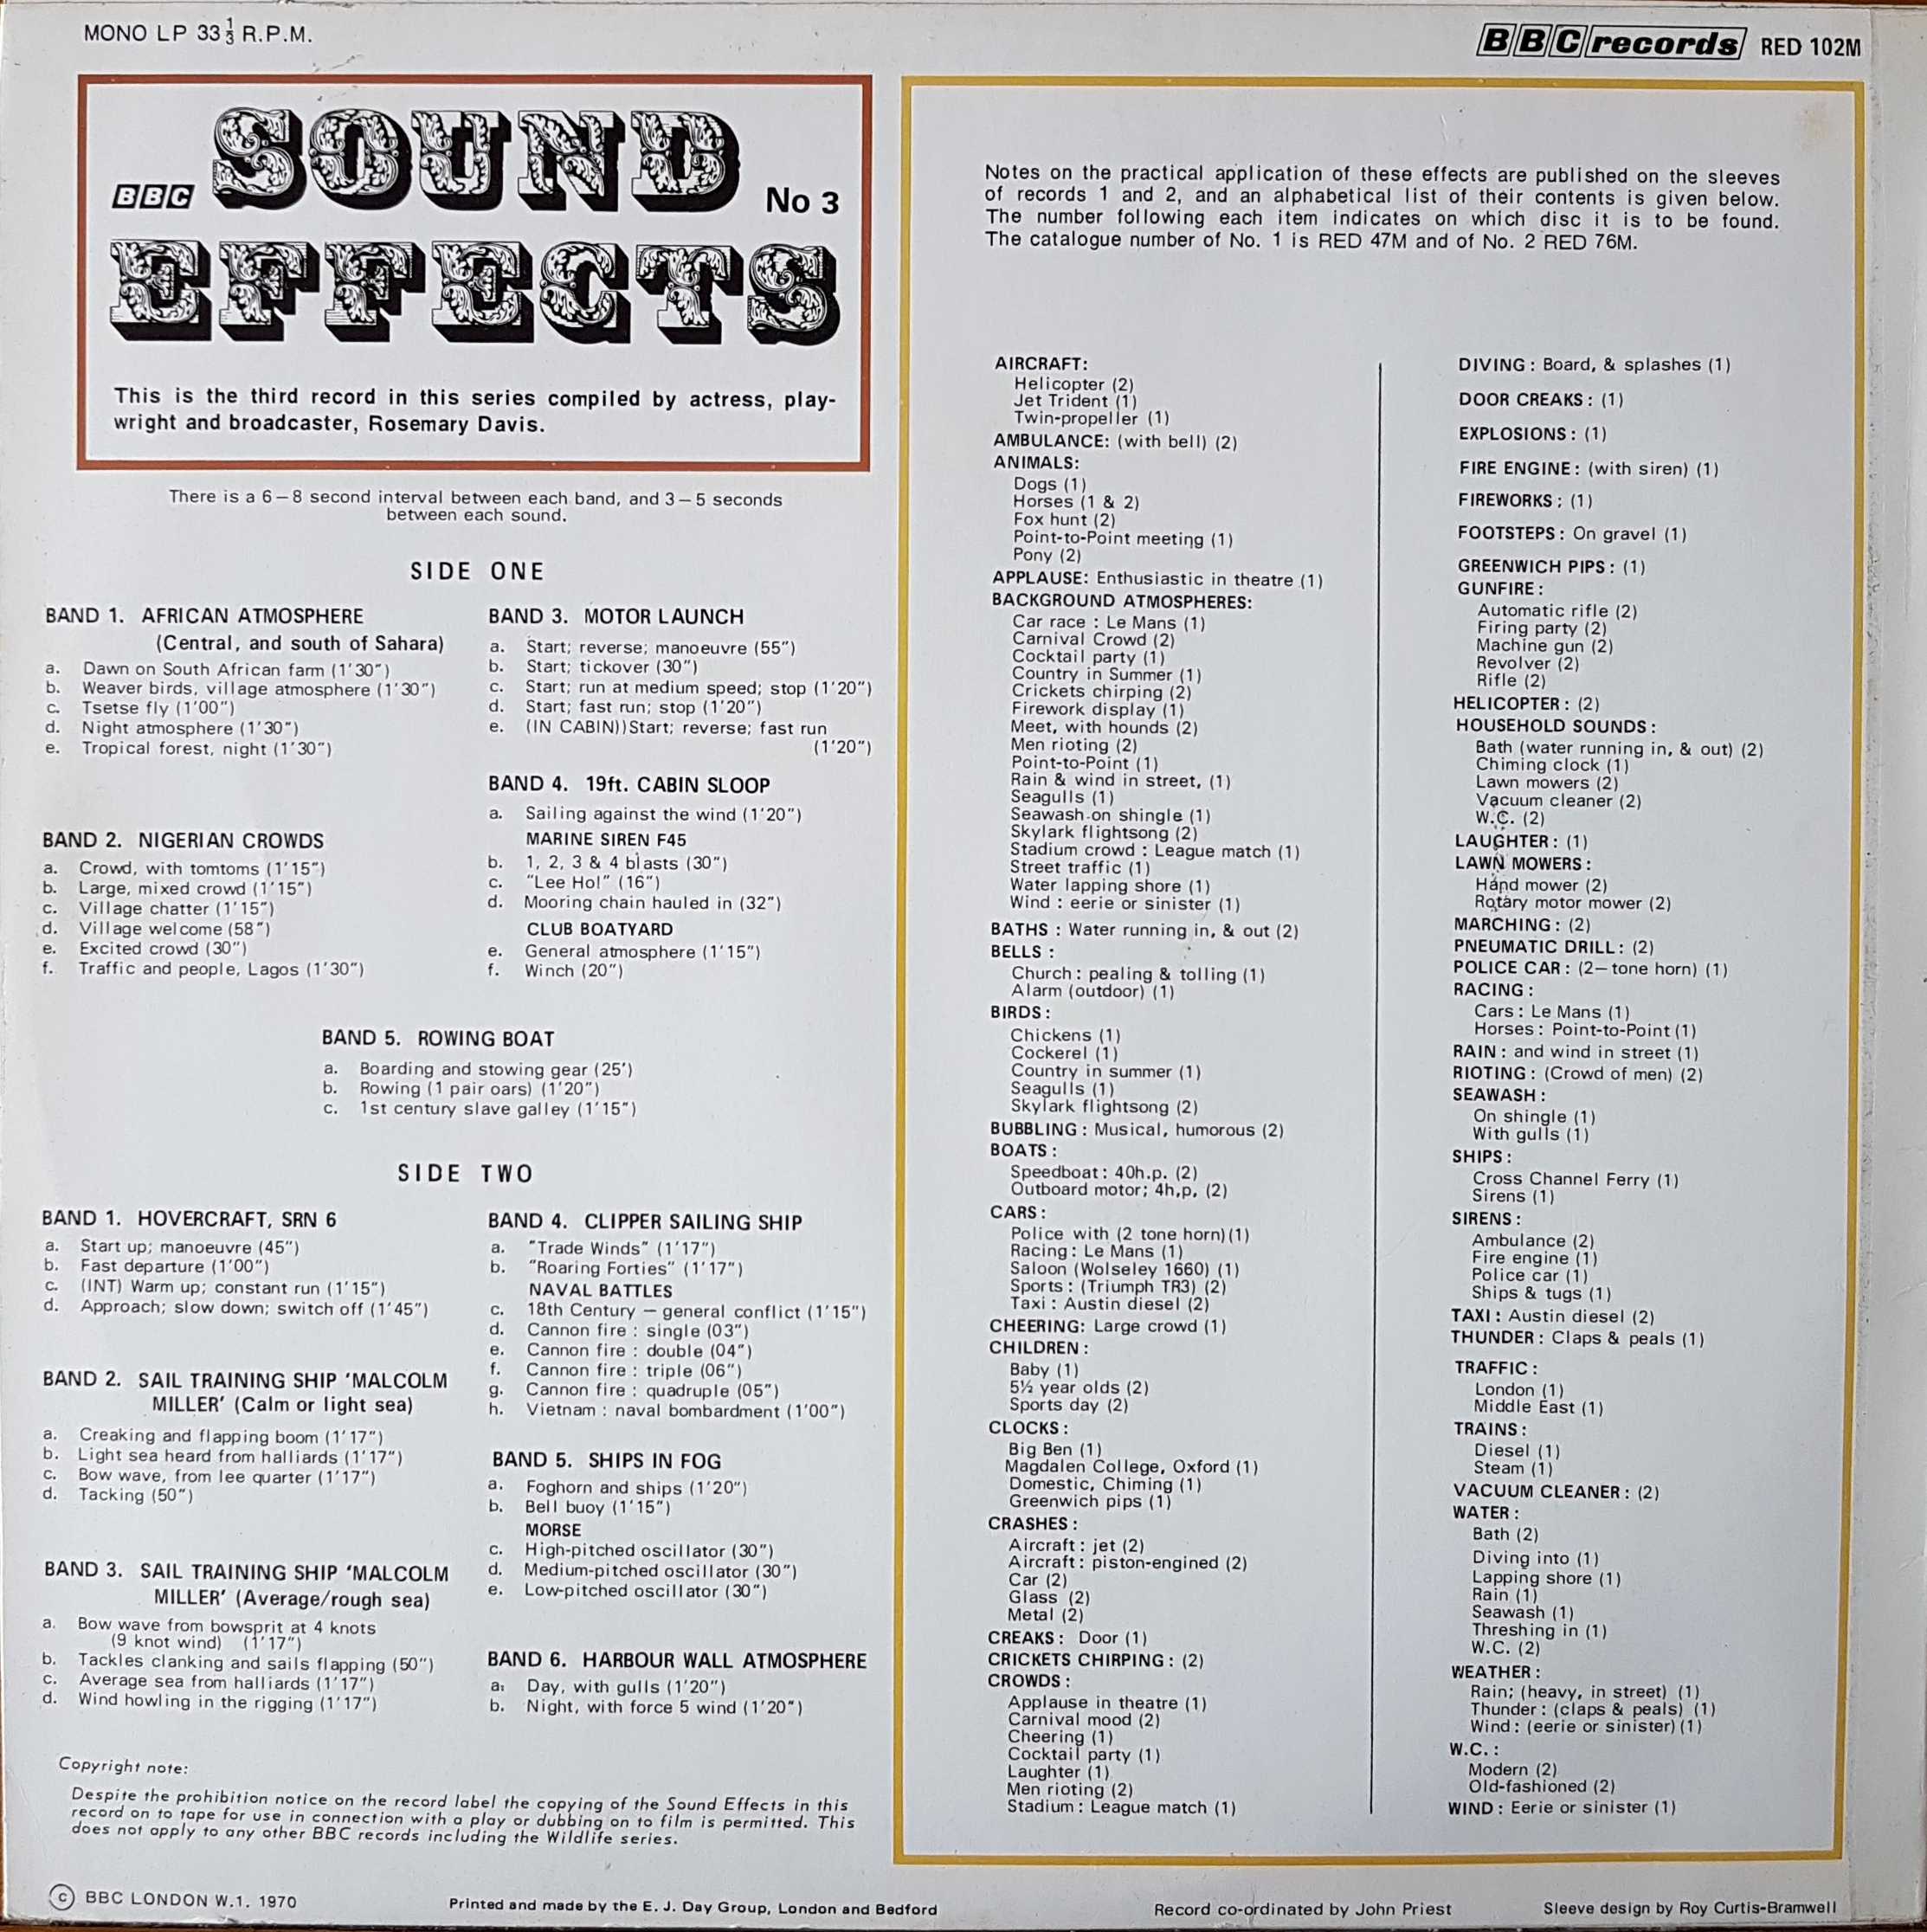 Picture of RED 102 Sound effects no. 3 by artist Various from the BBC records and Tapes library